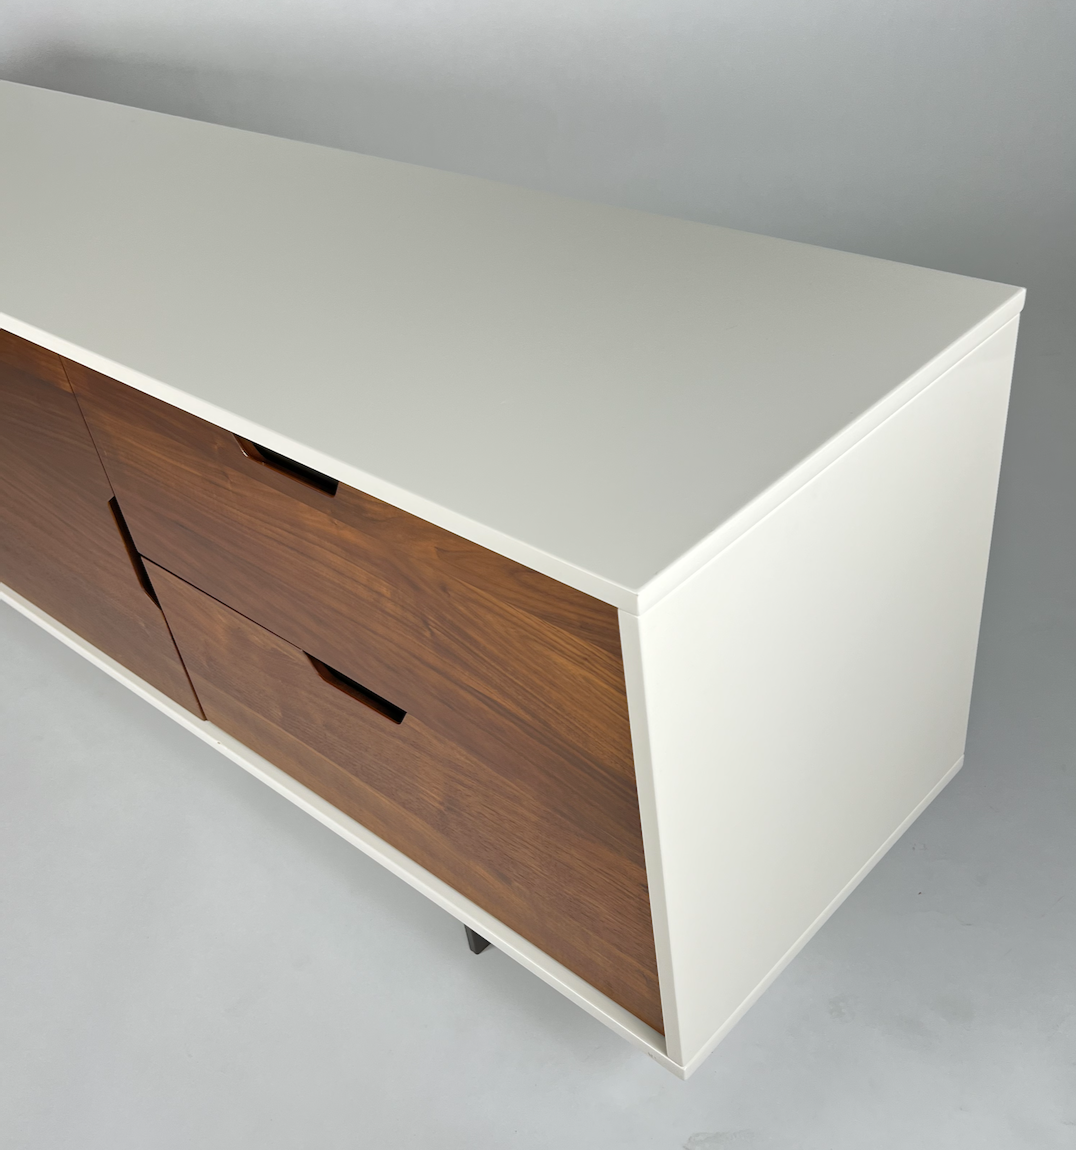 Gloss white cabinet with warm wood front, metal base and legs